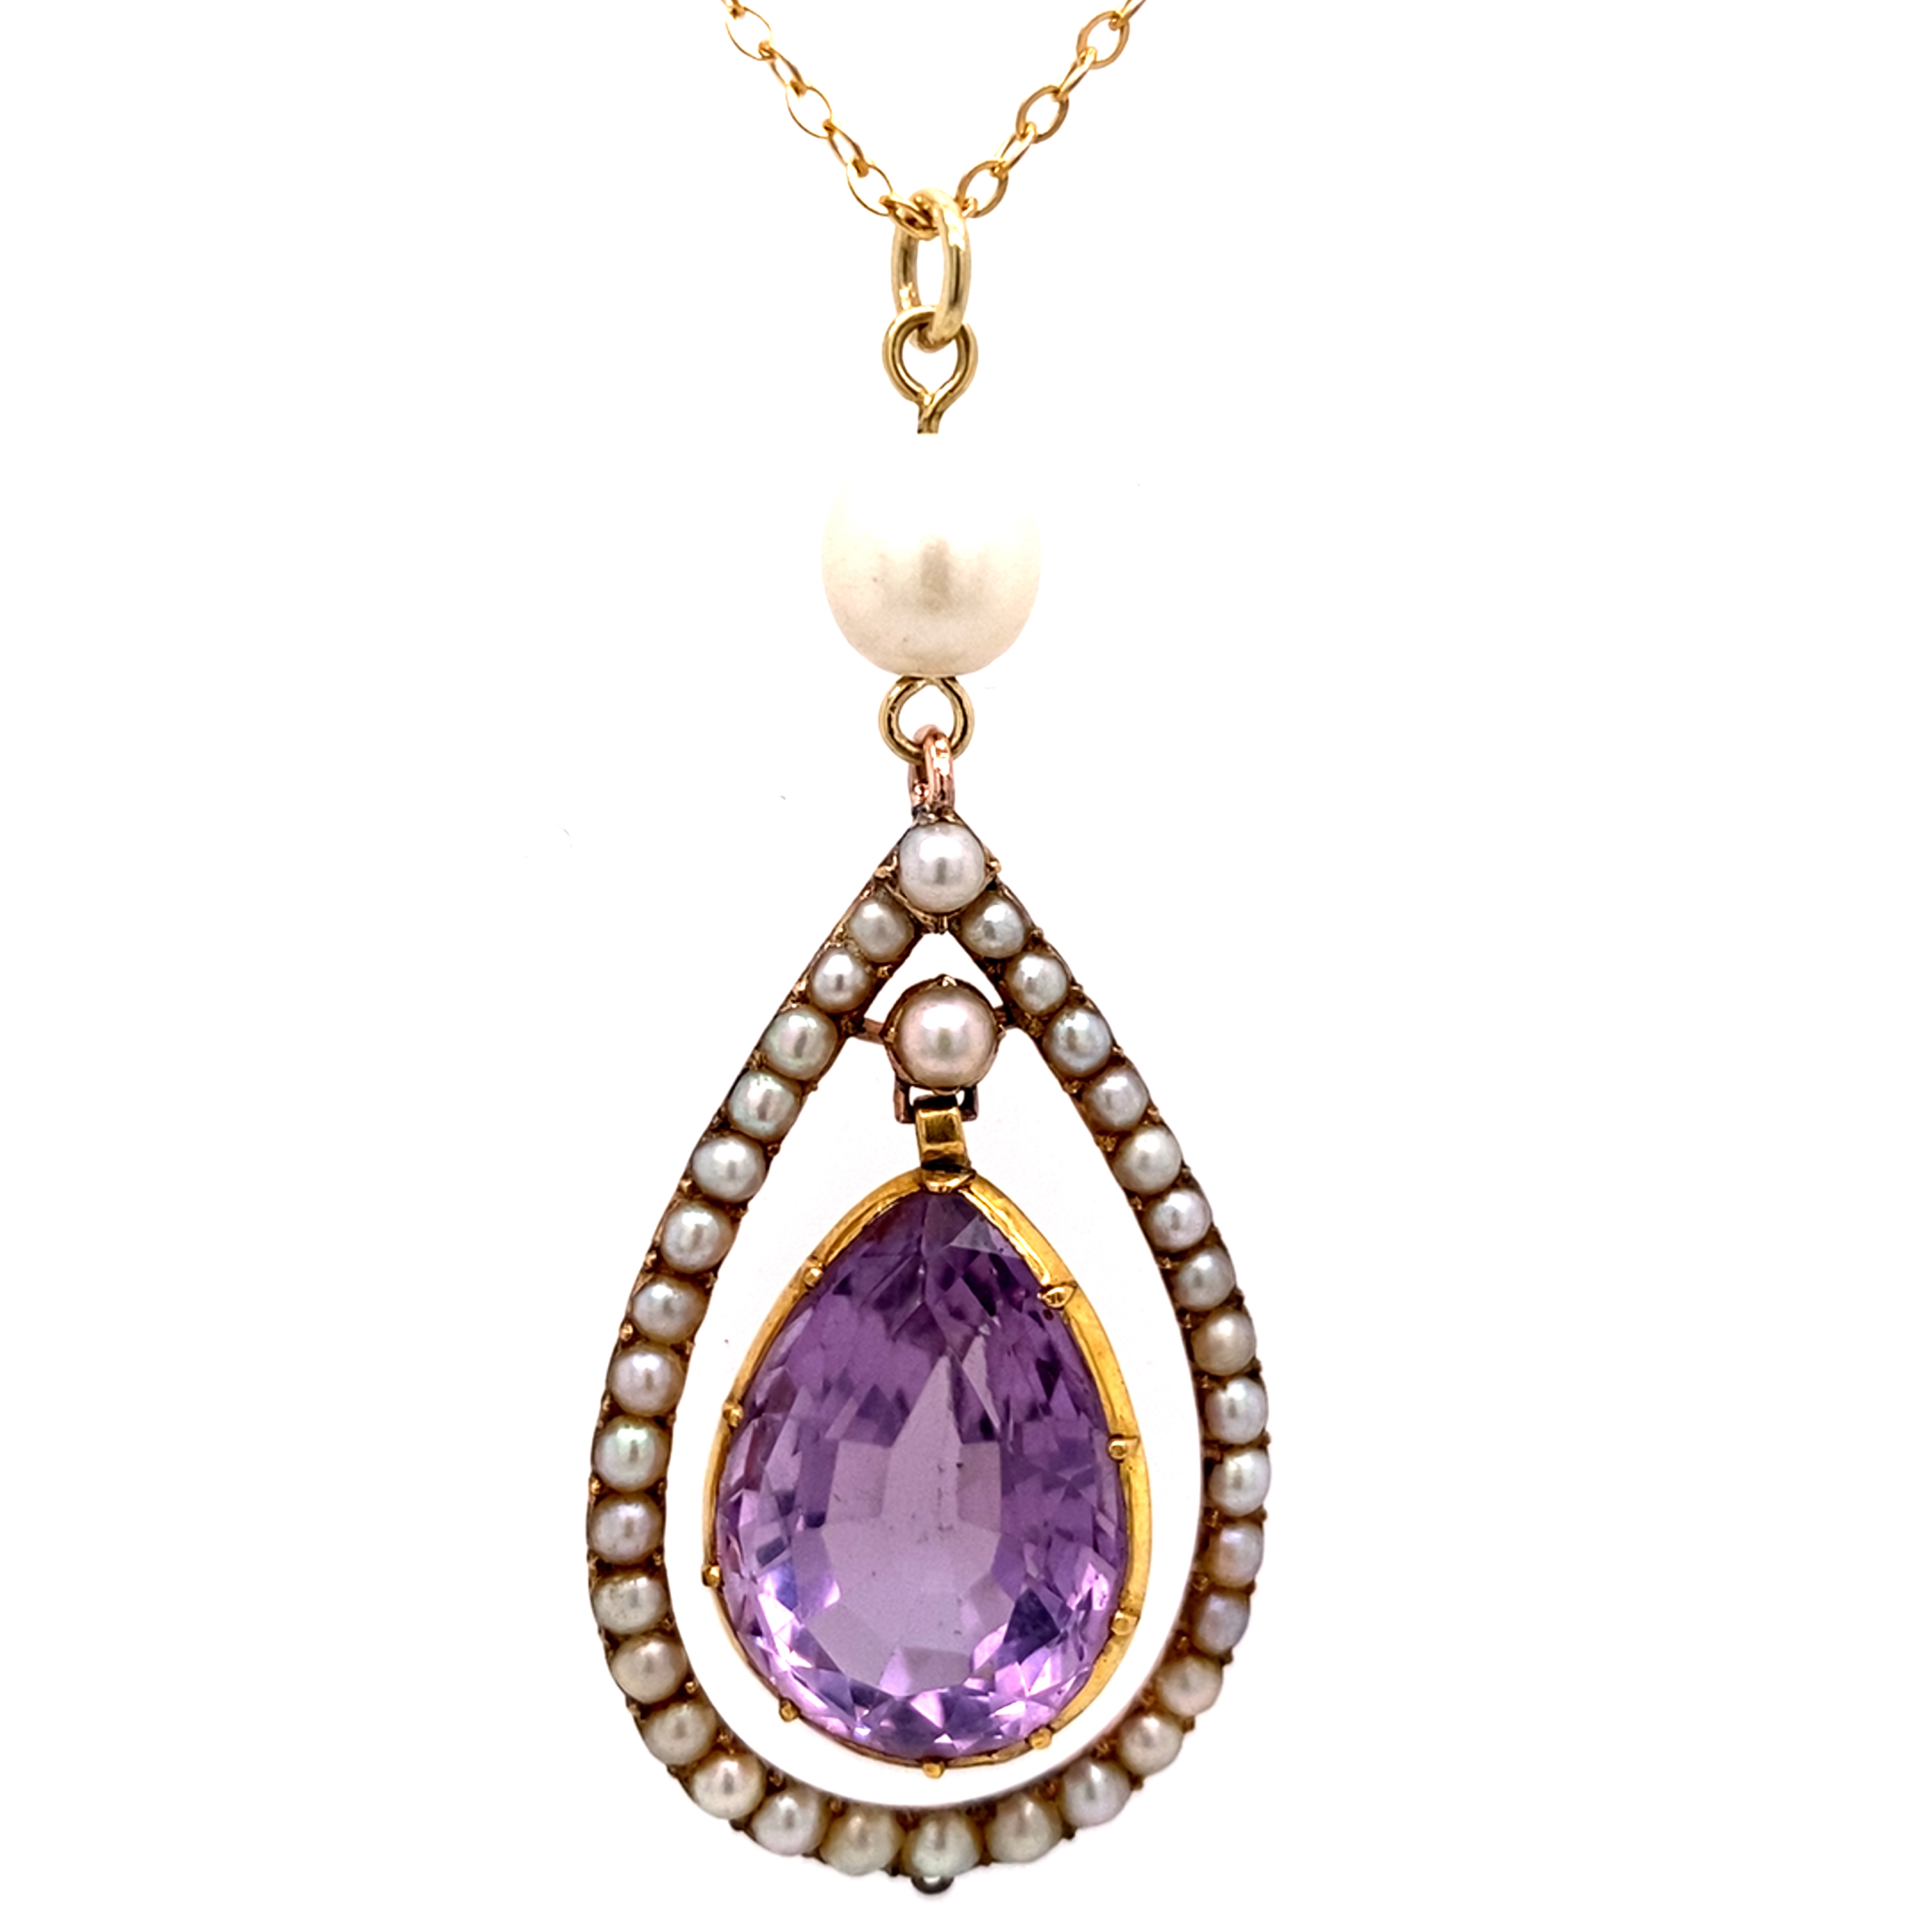 Pear Shape Amethyst With a Pearl Surround Pendant